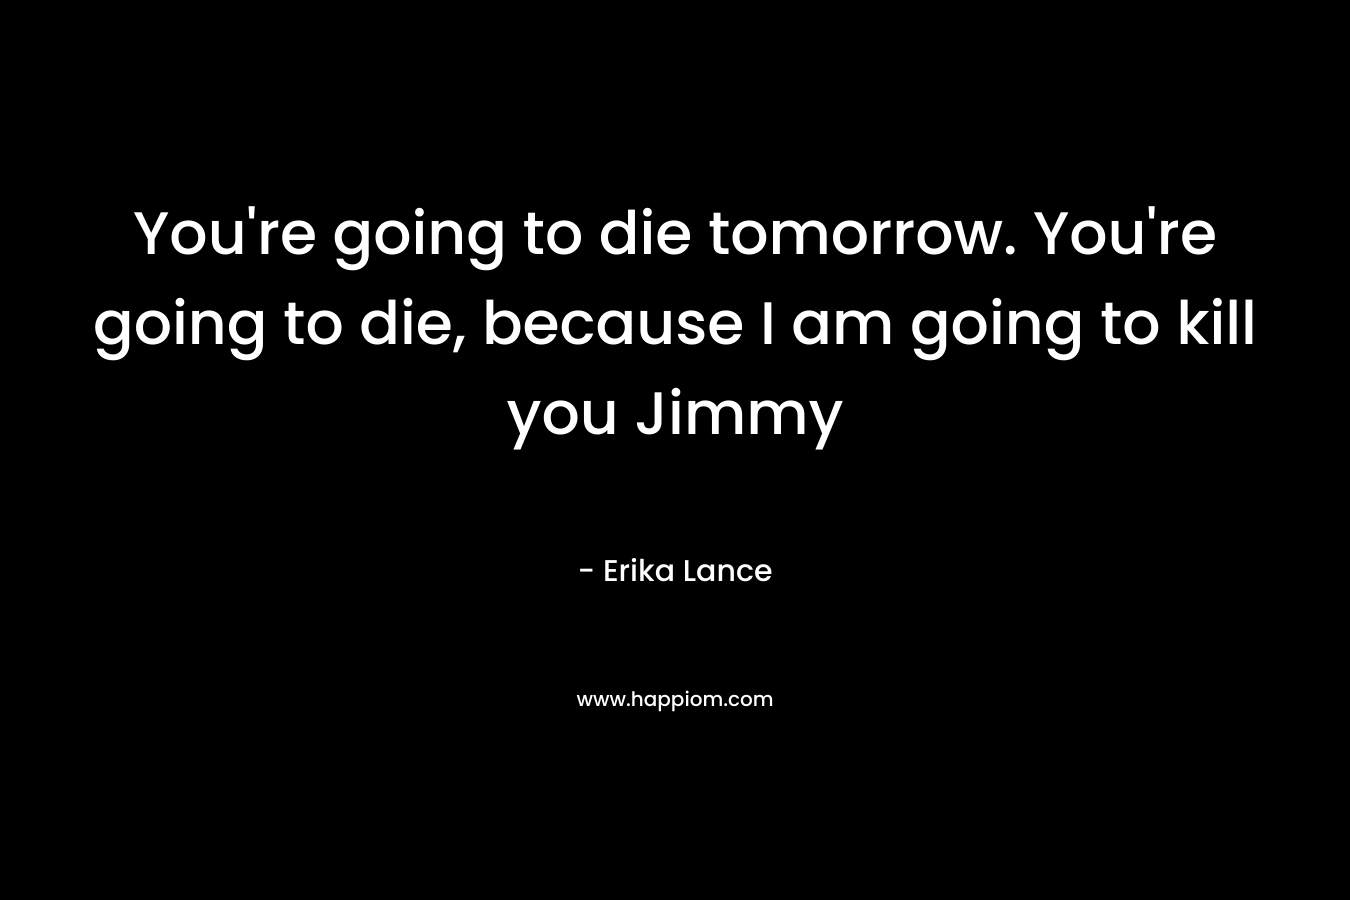 You're going to die tomorrow. You're going to die, because I am going to kill you Jimmy